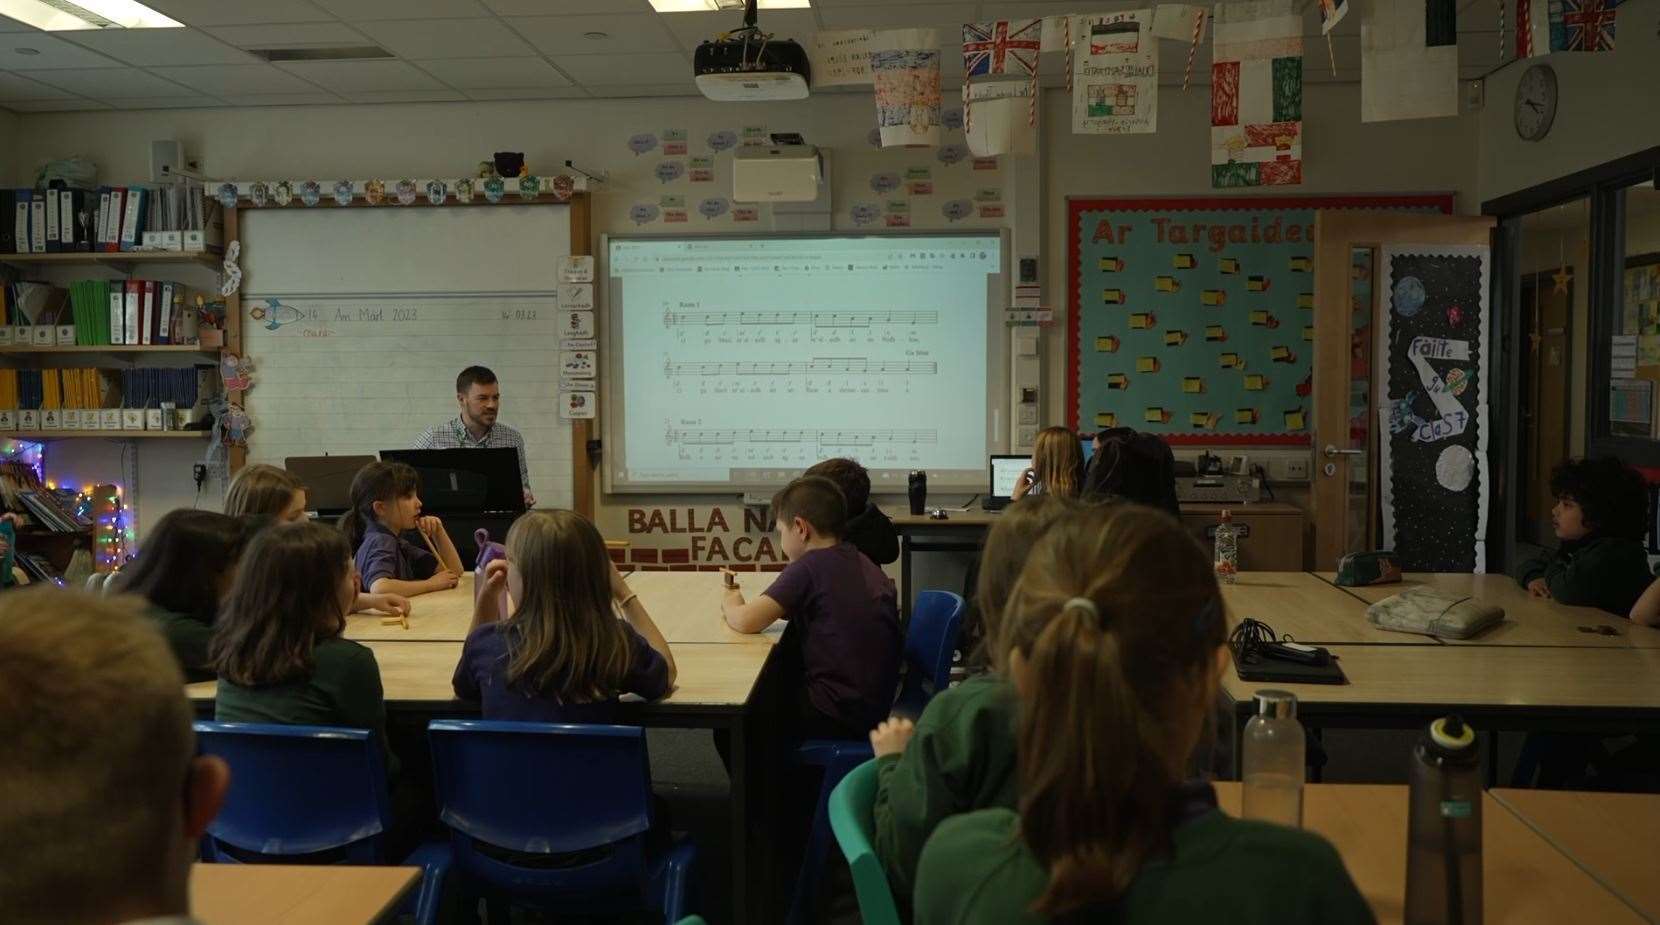 Over 40 pupils show up every Monday to sing at the Inverness Gaelic Primary School Choir class.